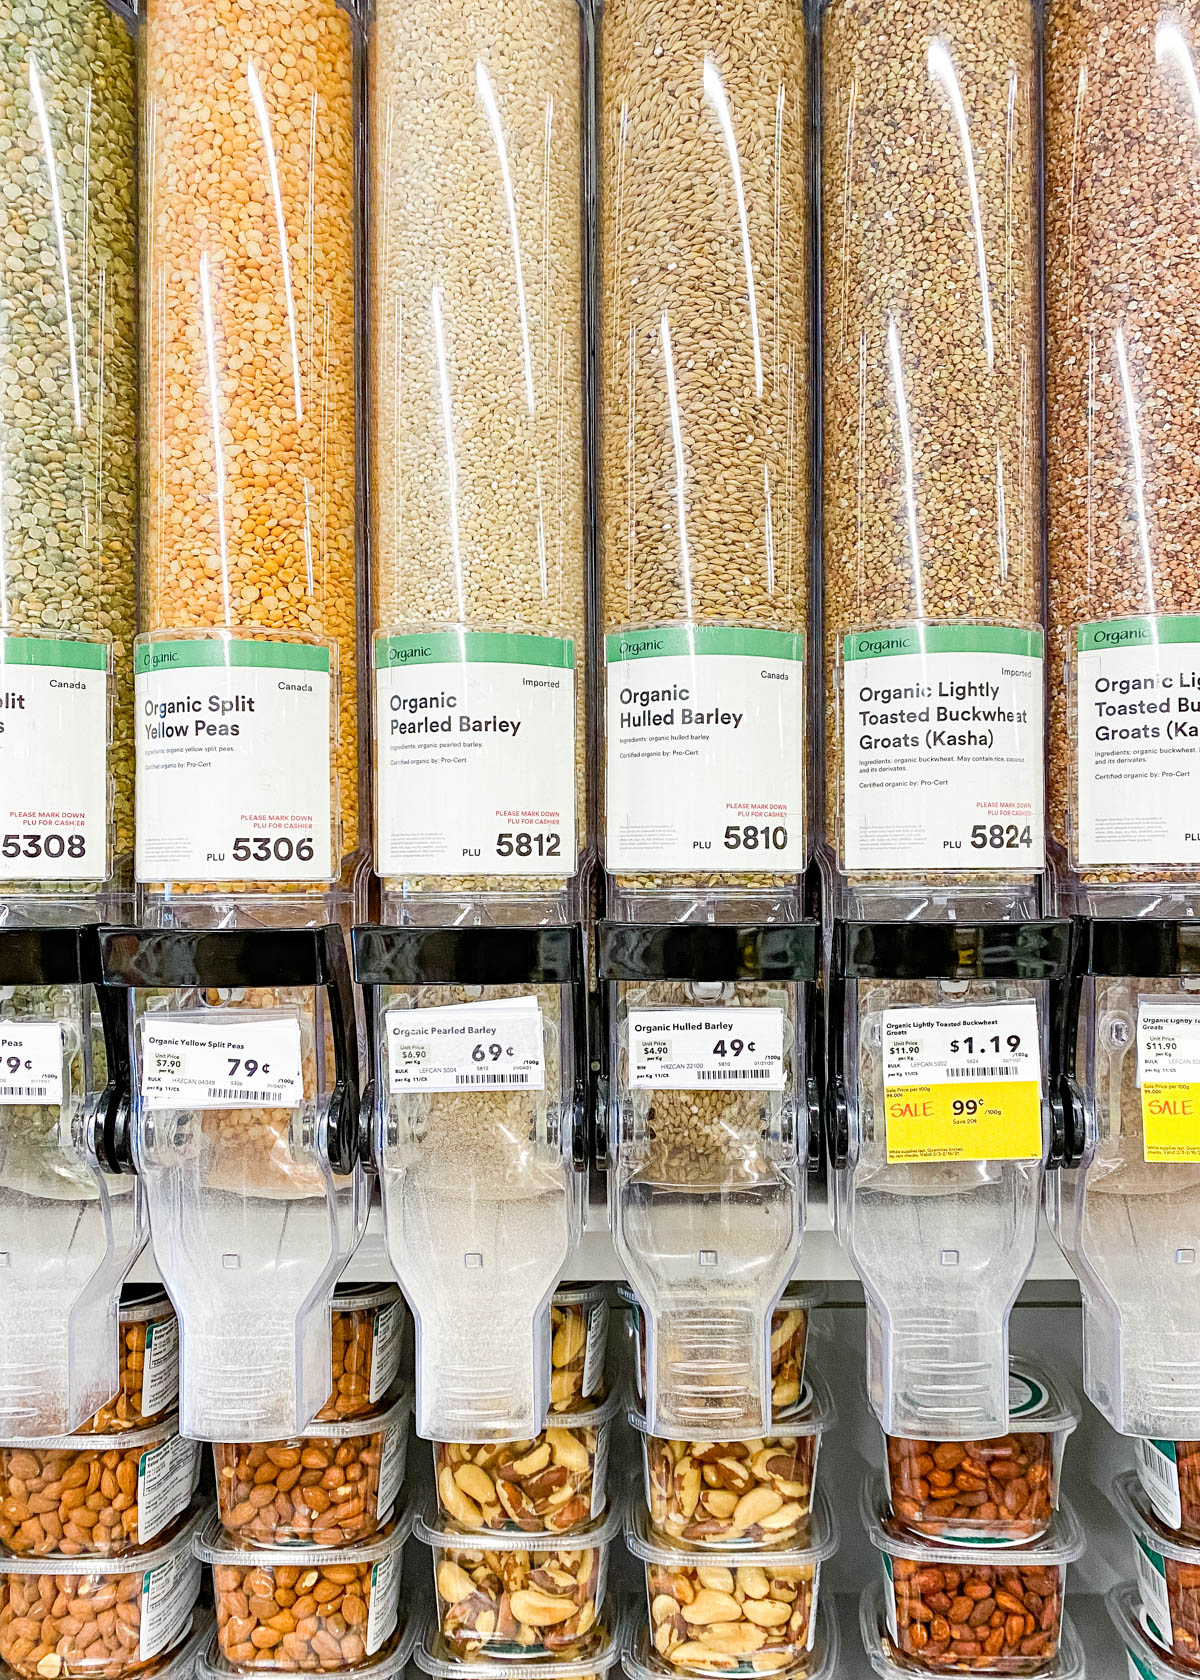 Bulk section of a grocery store showing barley in a hopper.